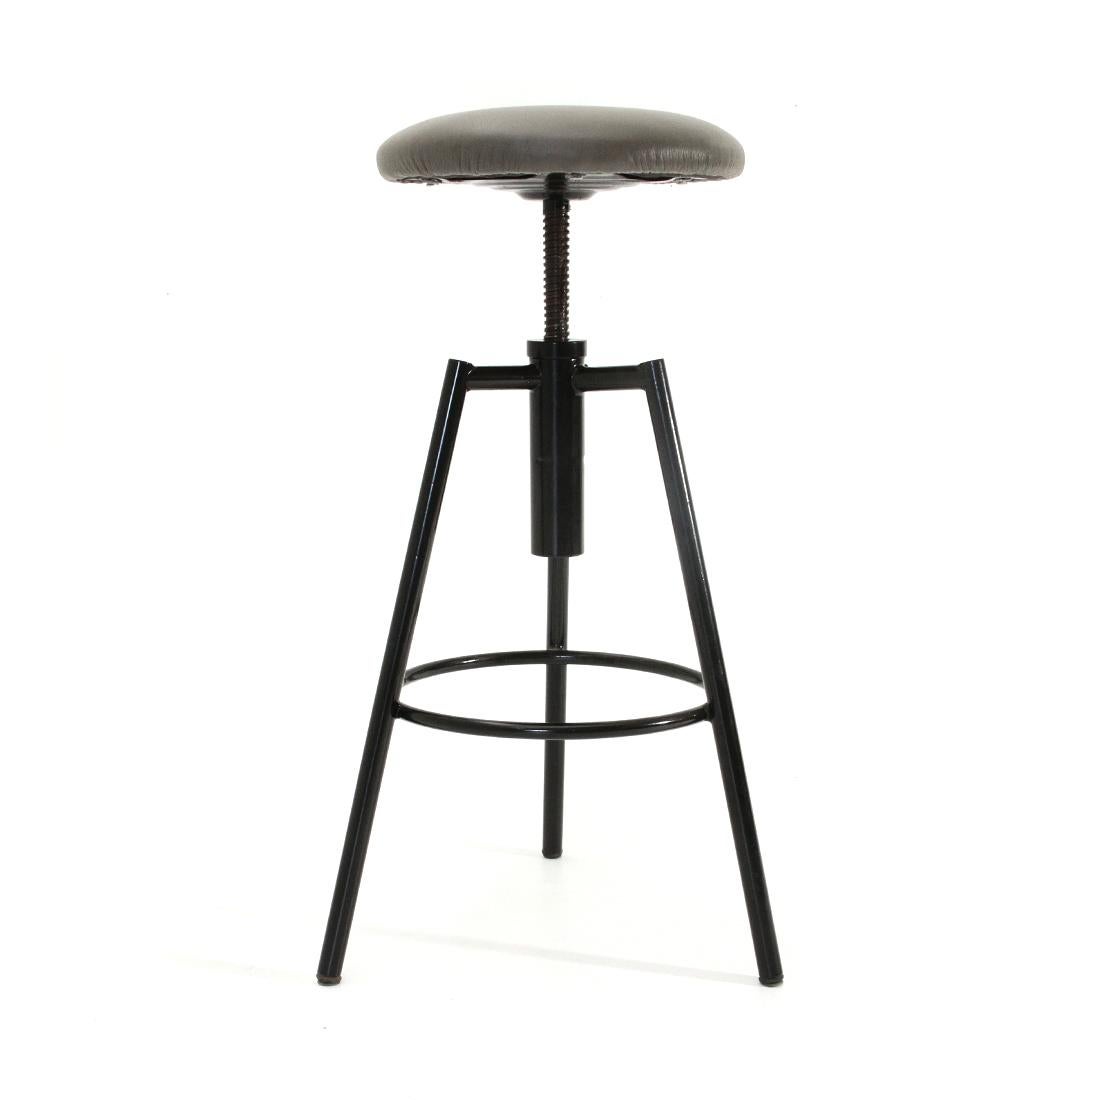 Mid-Century Modern Metal Stool with Padded Seat, 1960s For Sale